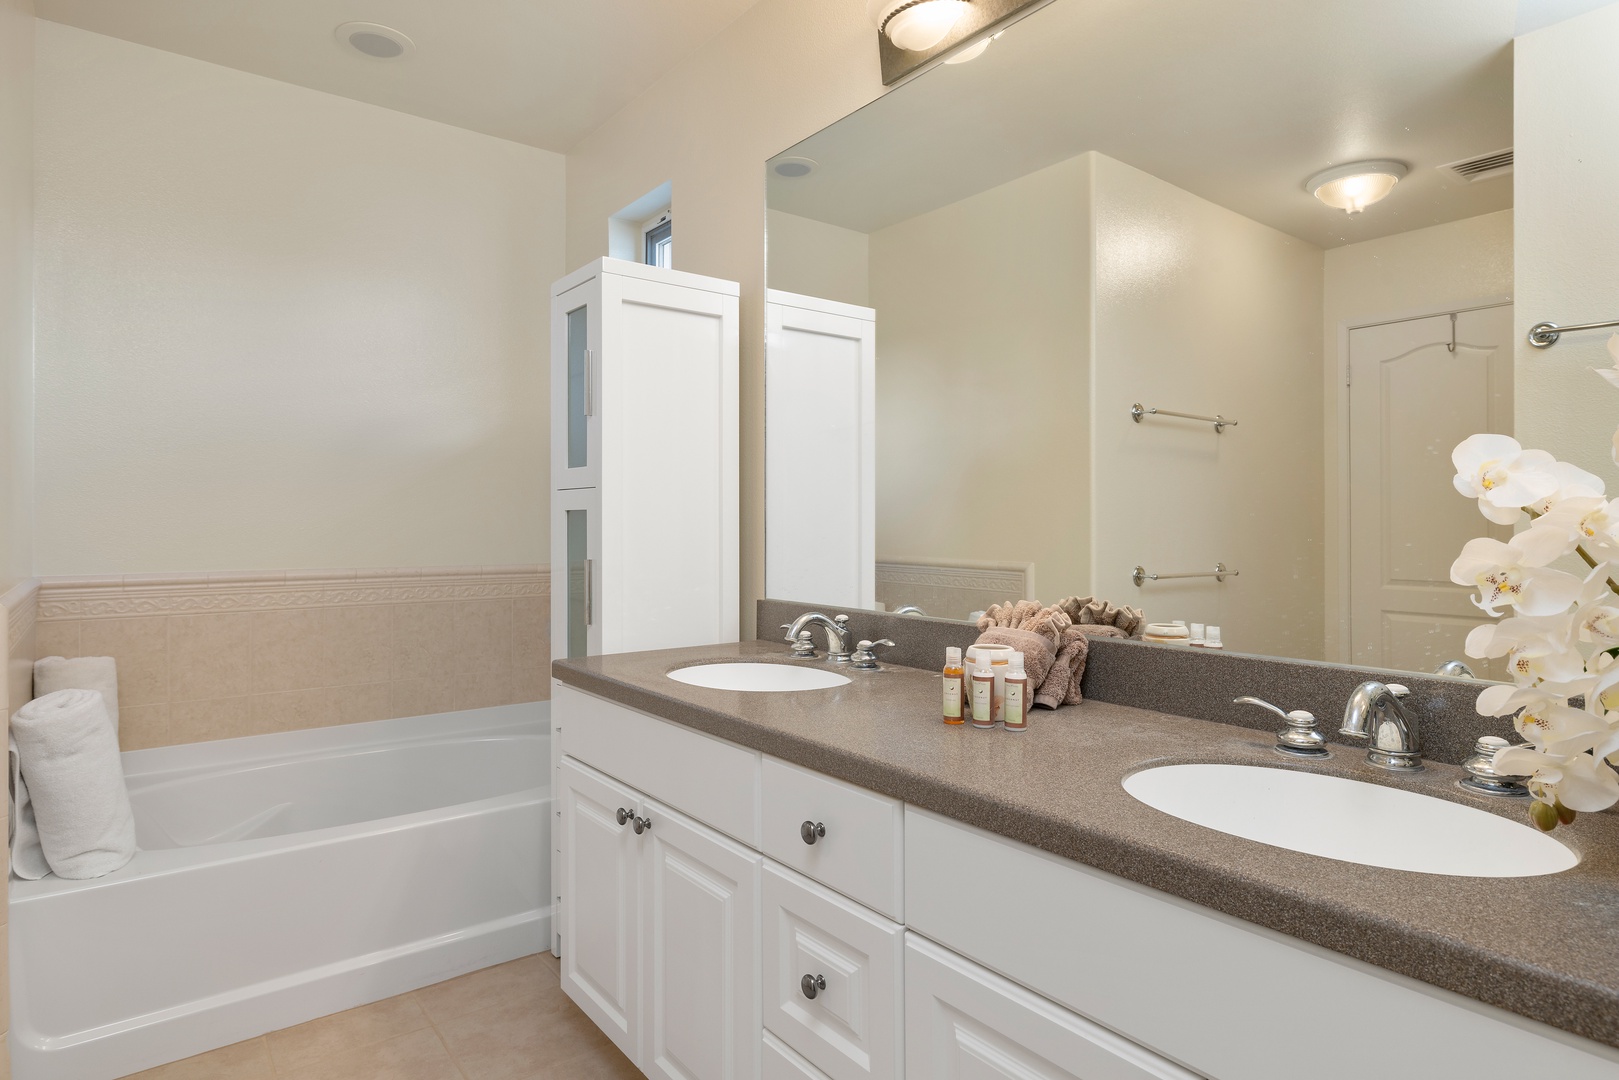 Kapolei Vacation Rentals, Ko Olina Kai 1083C - The primary guest bathroom with a walk-in shower, cabinetry and a soaking tub.